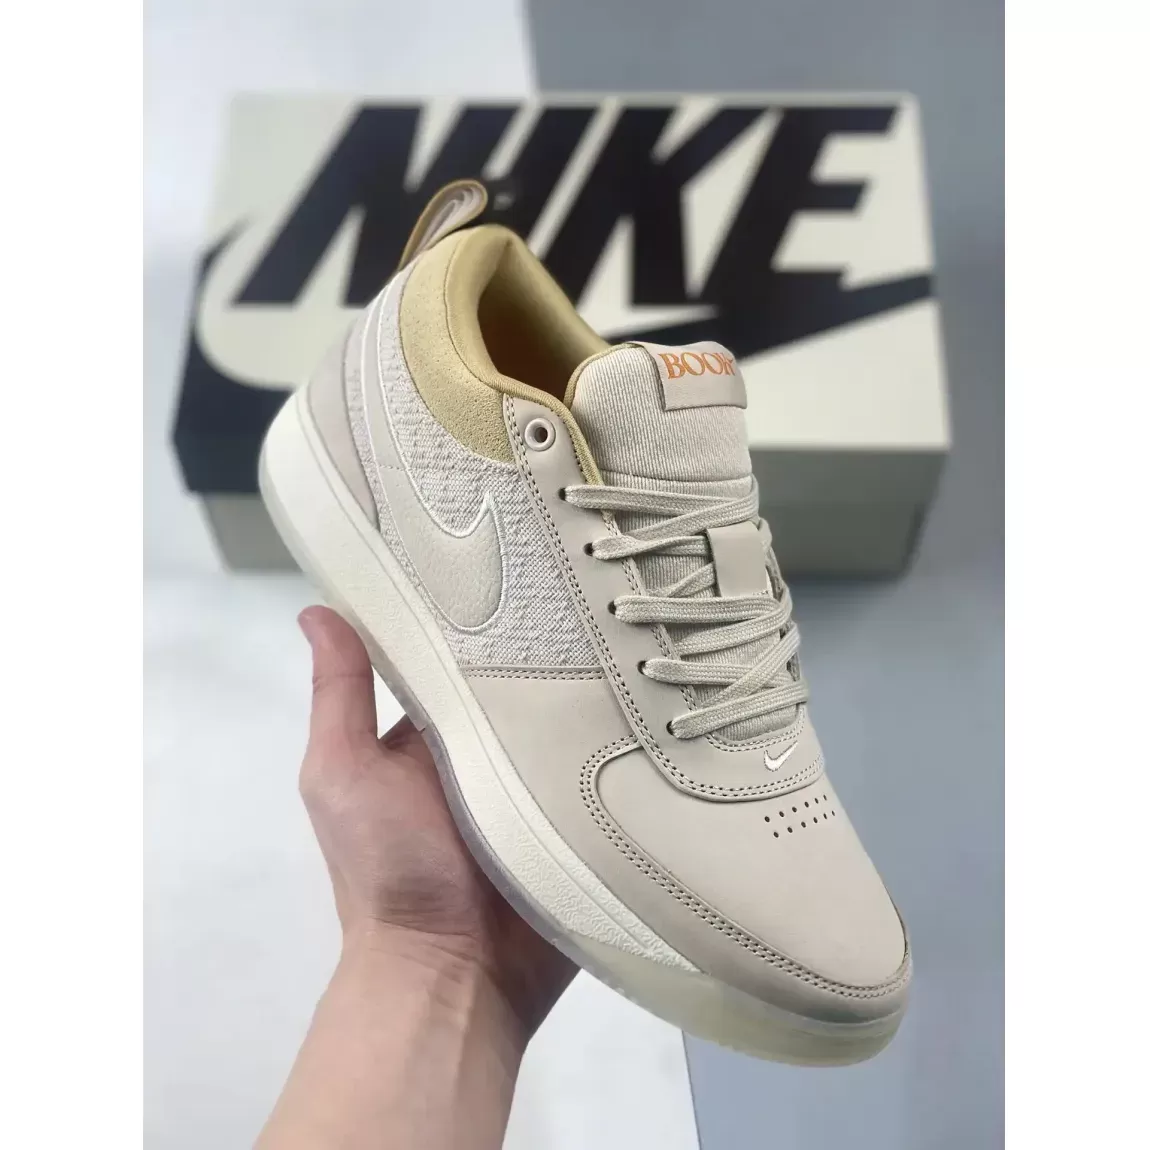 Nike Book 1 Light Orewood Brown/Sesame-Sail New Arrival For Sale